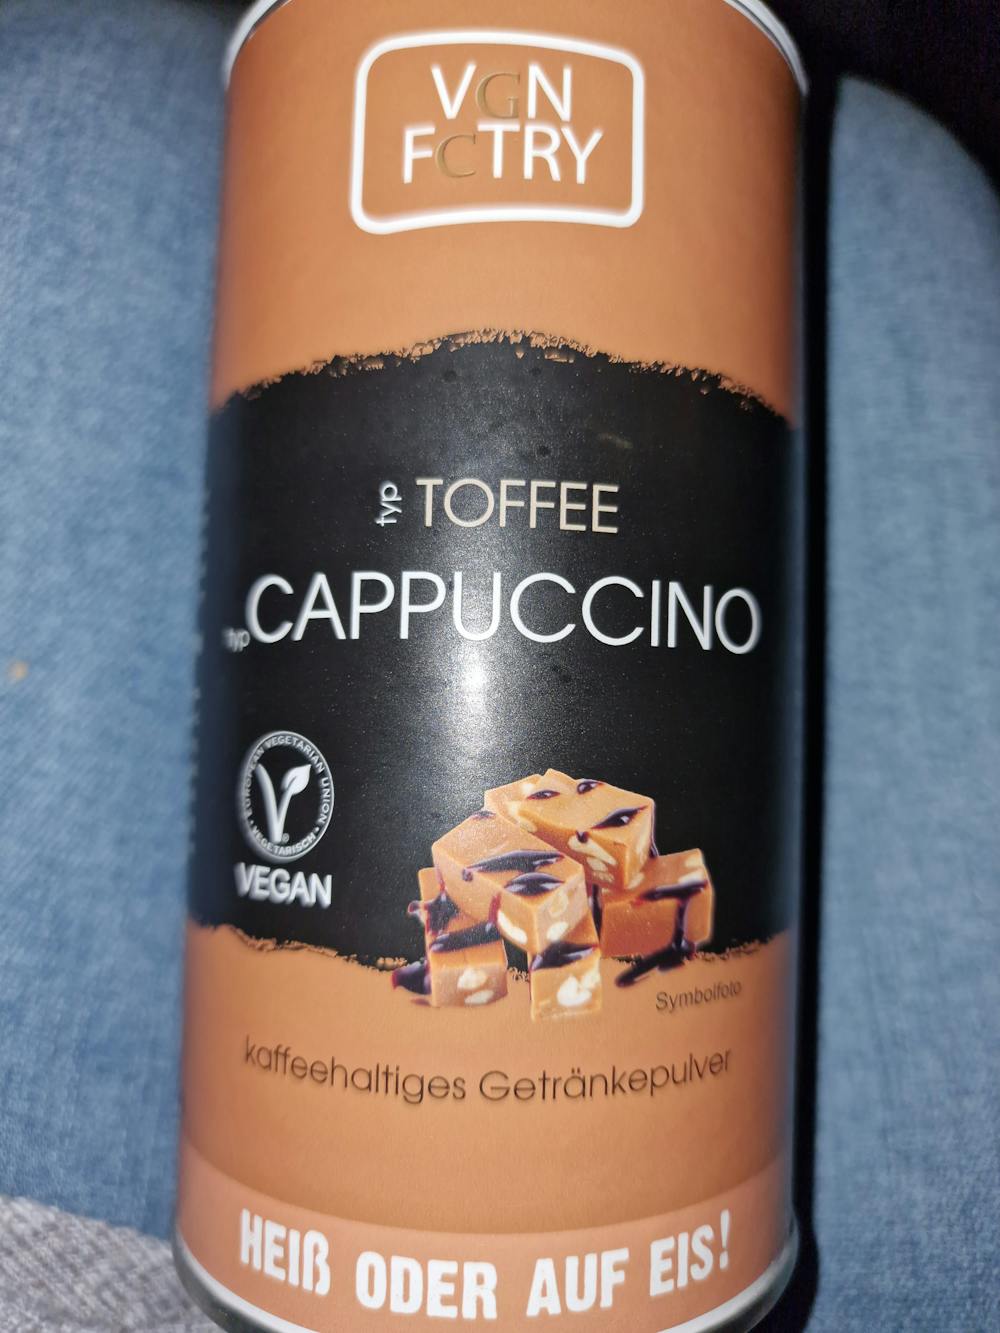 Toffee cappuccino, VGN FCTRY